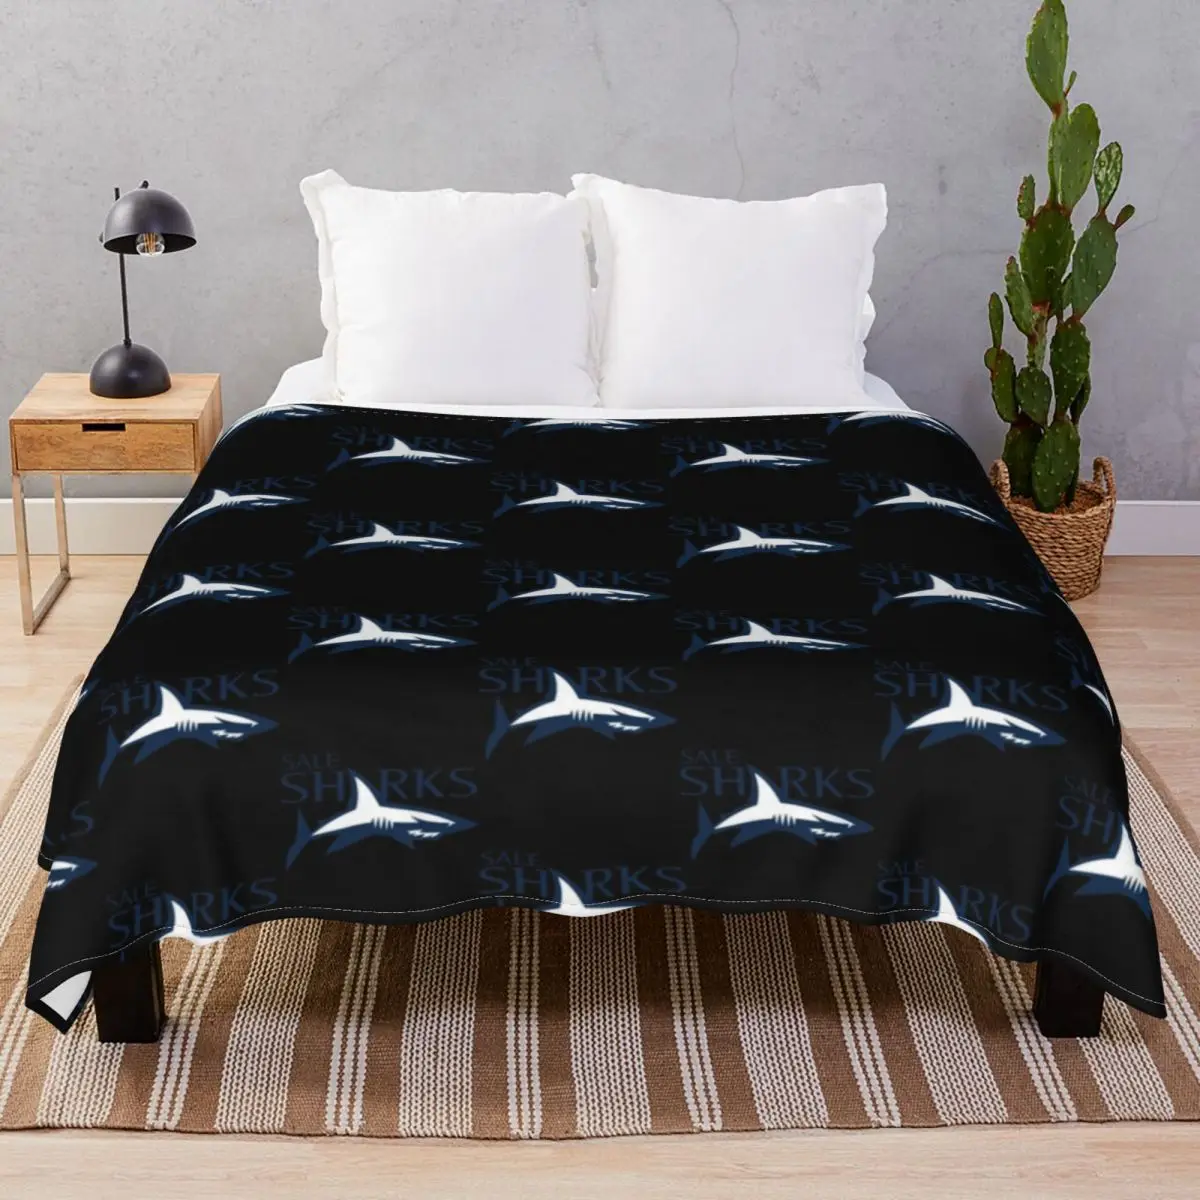 Sale Sharks Rugby Blankets Flannel Summer Warm Throw Blanket for Bed Home Couch Travel Cinema